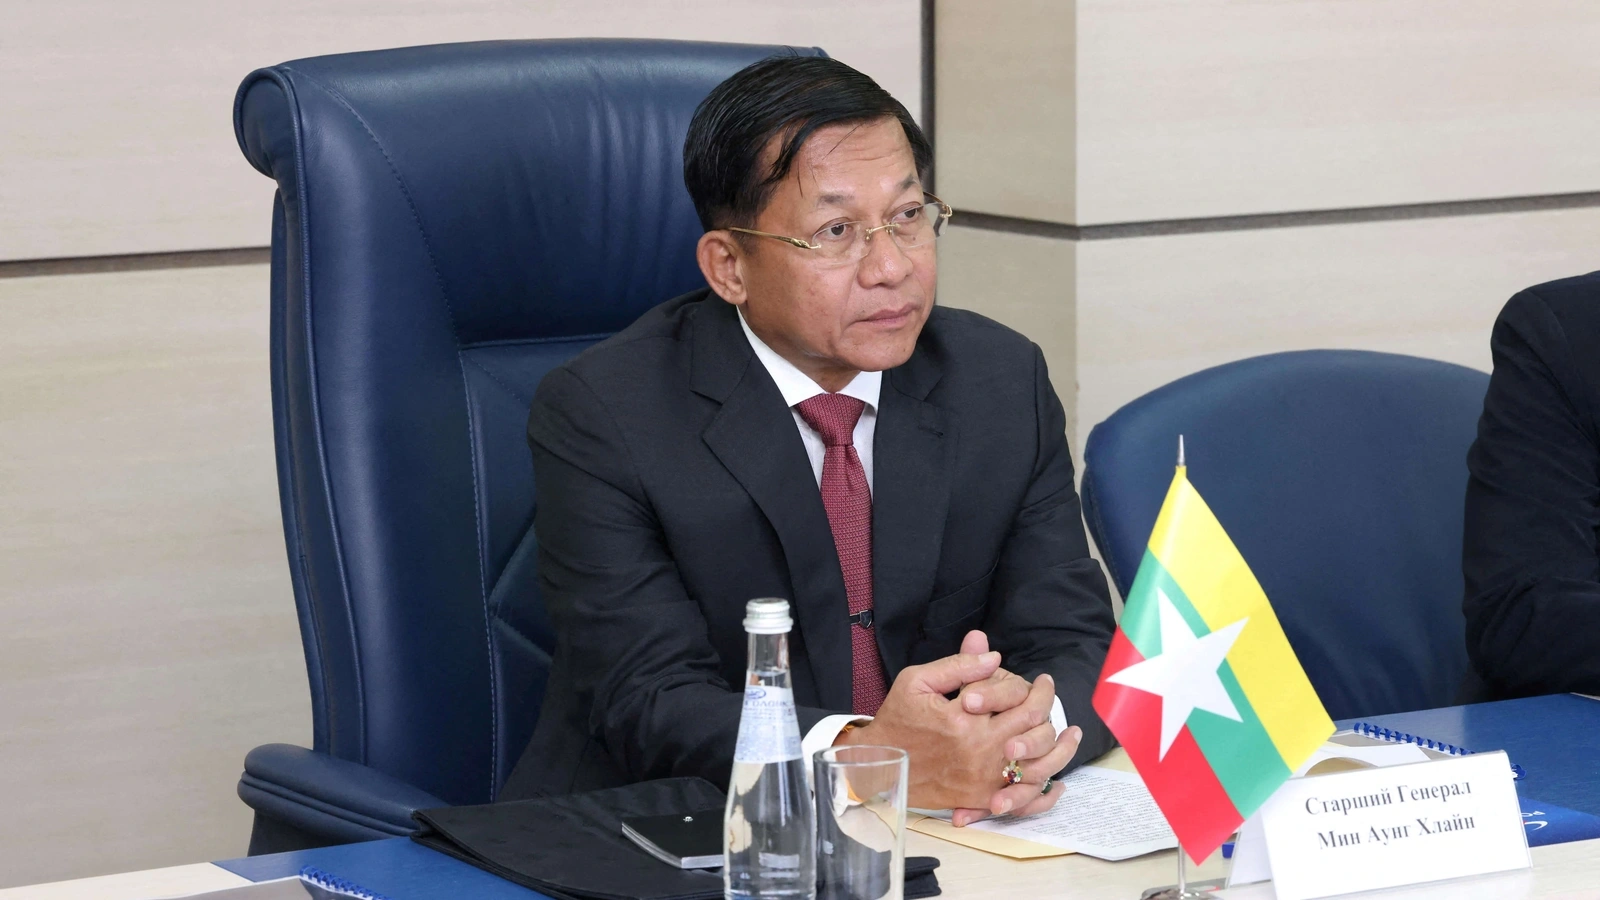 Myanmar's Prime Minister and State Administrative Council Chairman Min Aung Hlaing attends a meeting with Director General of Roscosmos Dmitry Rogozin in Moscow, Russia, on July 12, 2022.